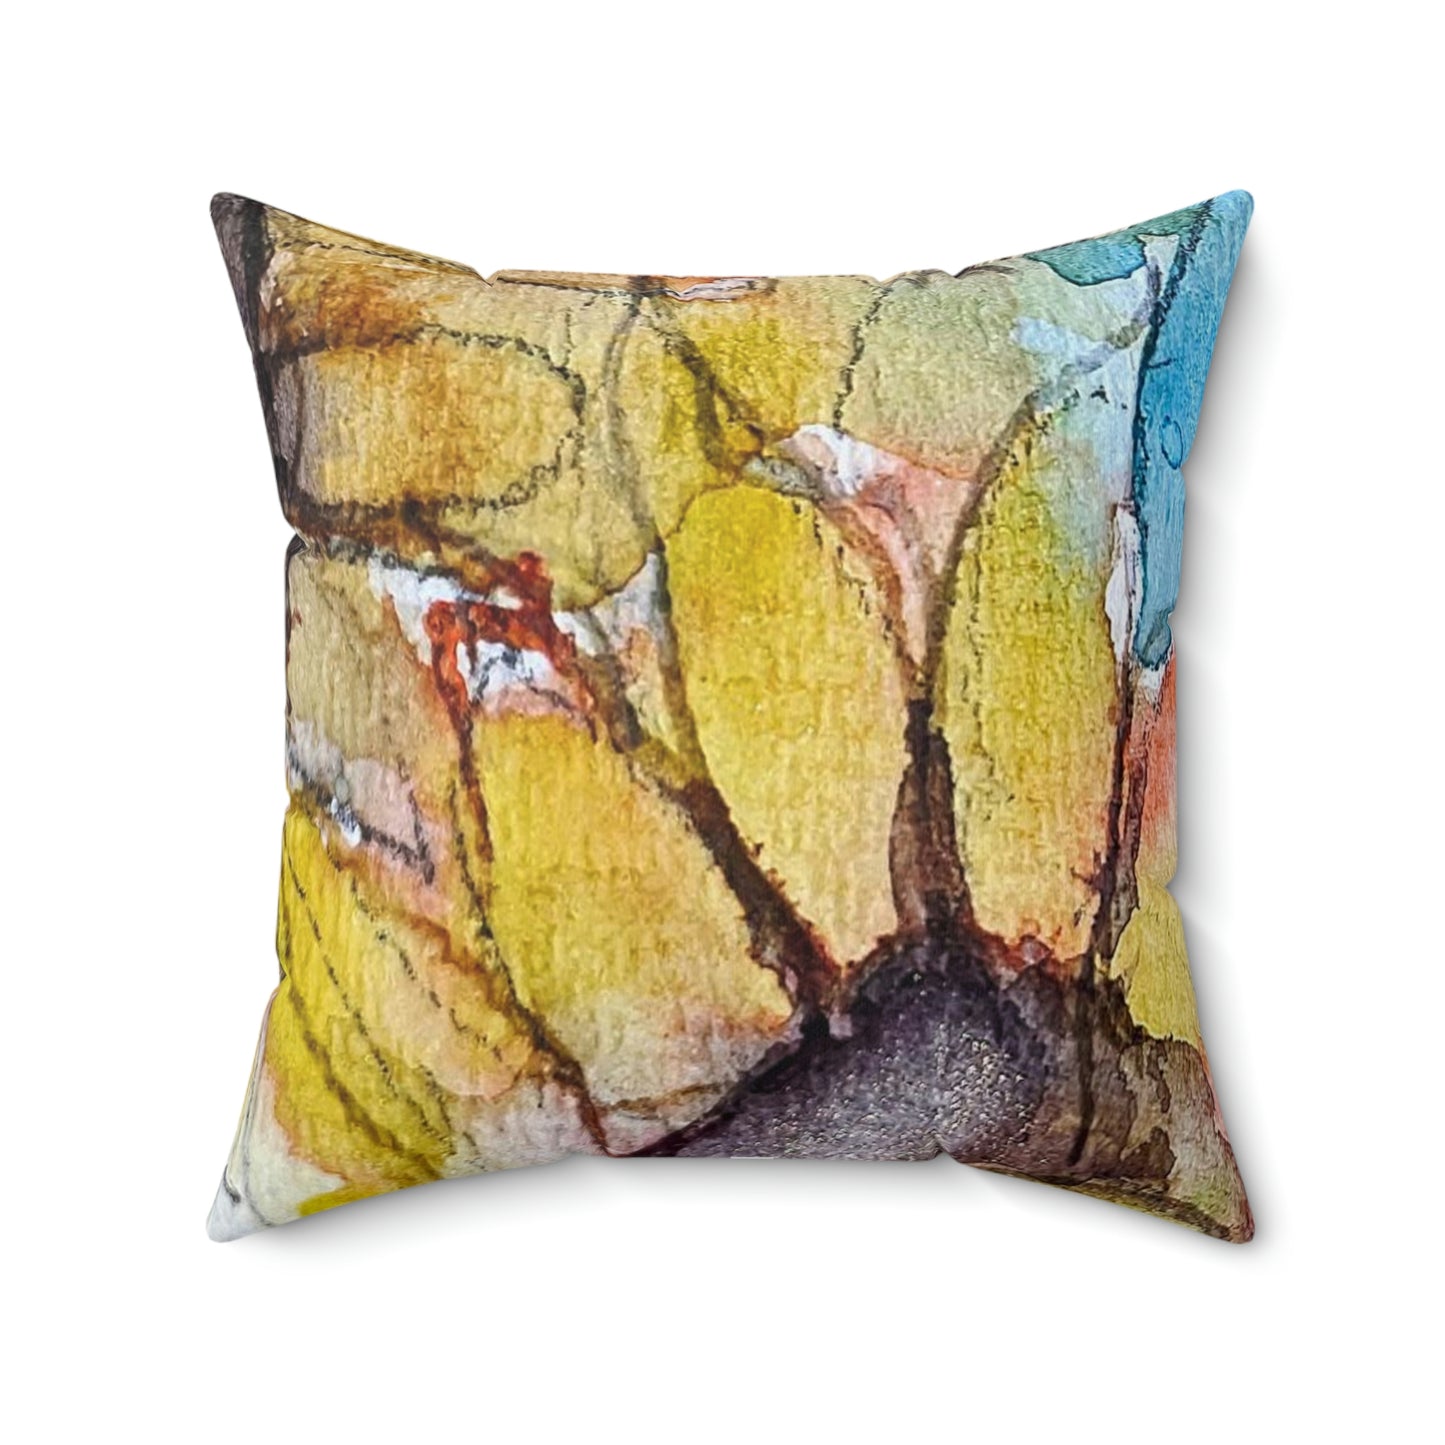 Sunflowers Indoor Spun Polyester Square Pillow